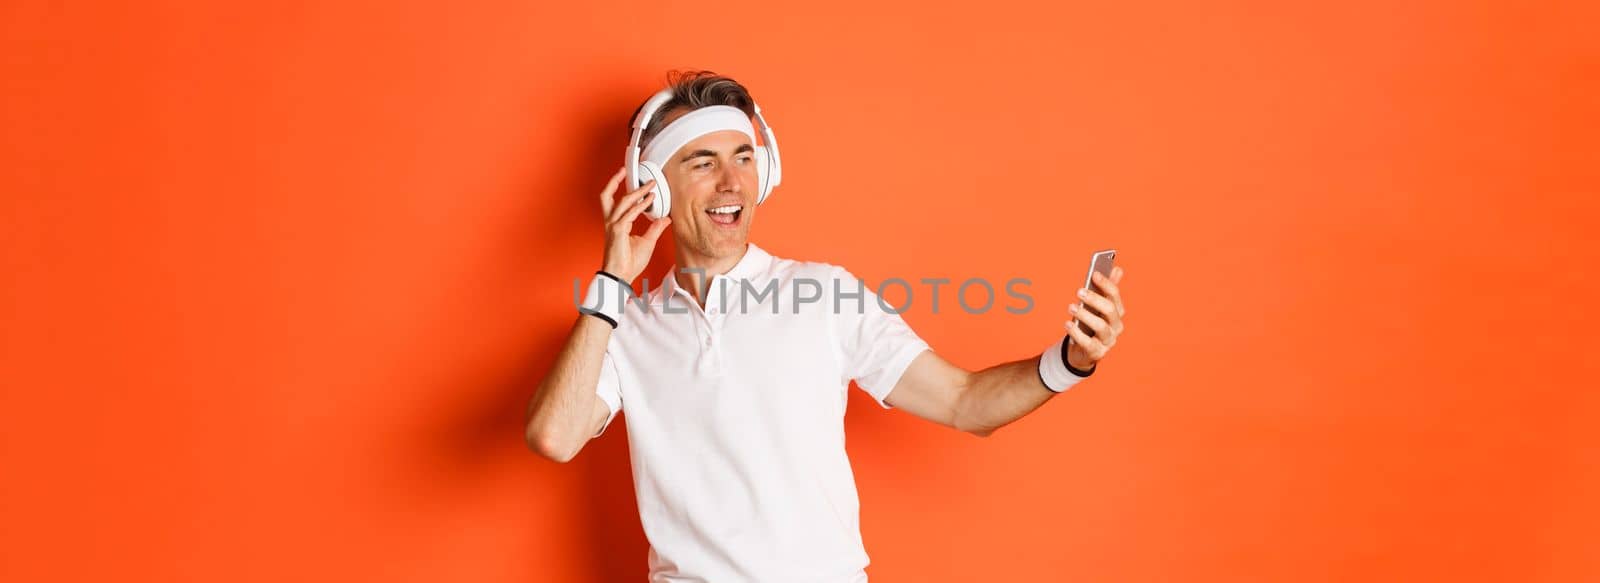 Portrait of handsome middle-aged male athlete, wearing gym uniform, listening music in headphones and taking selfie on mobile phone during workout, standing over orange background.